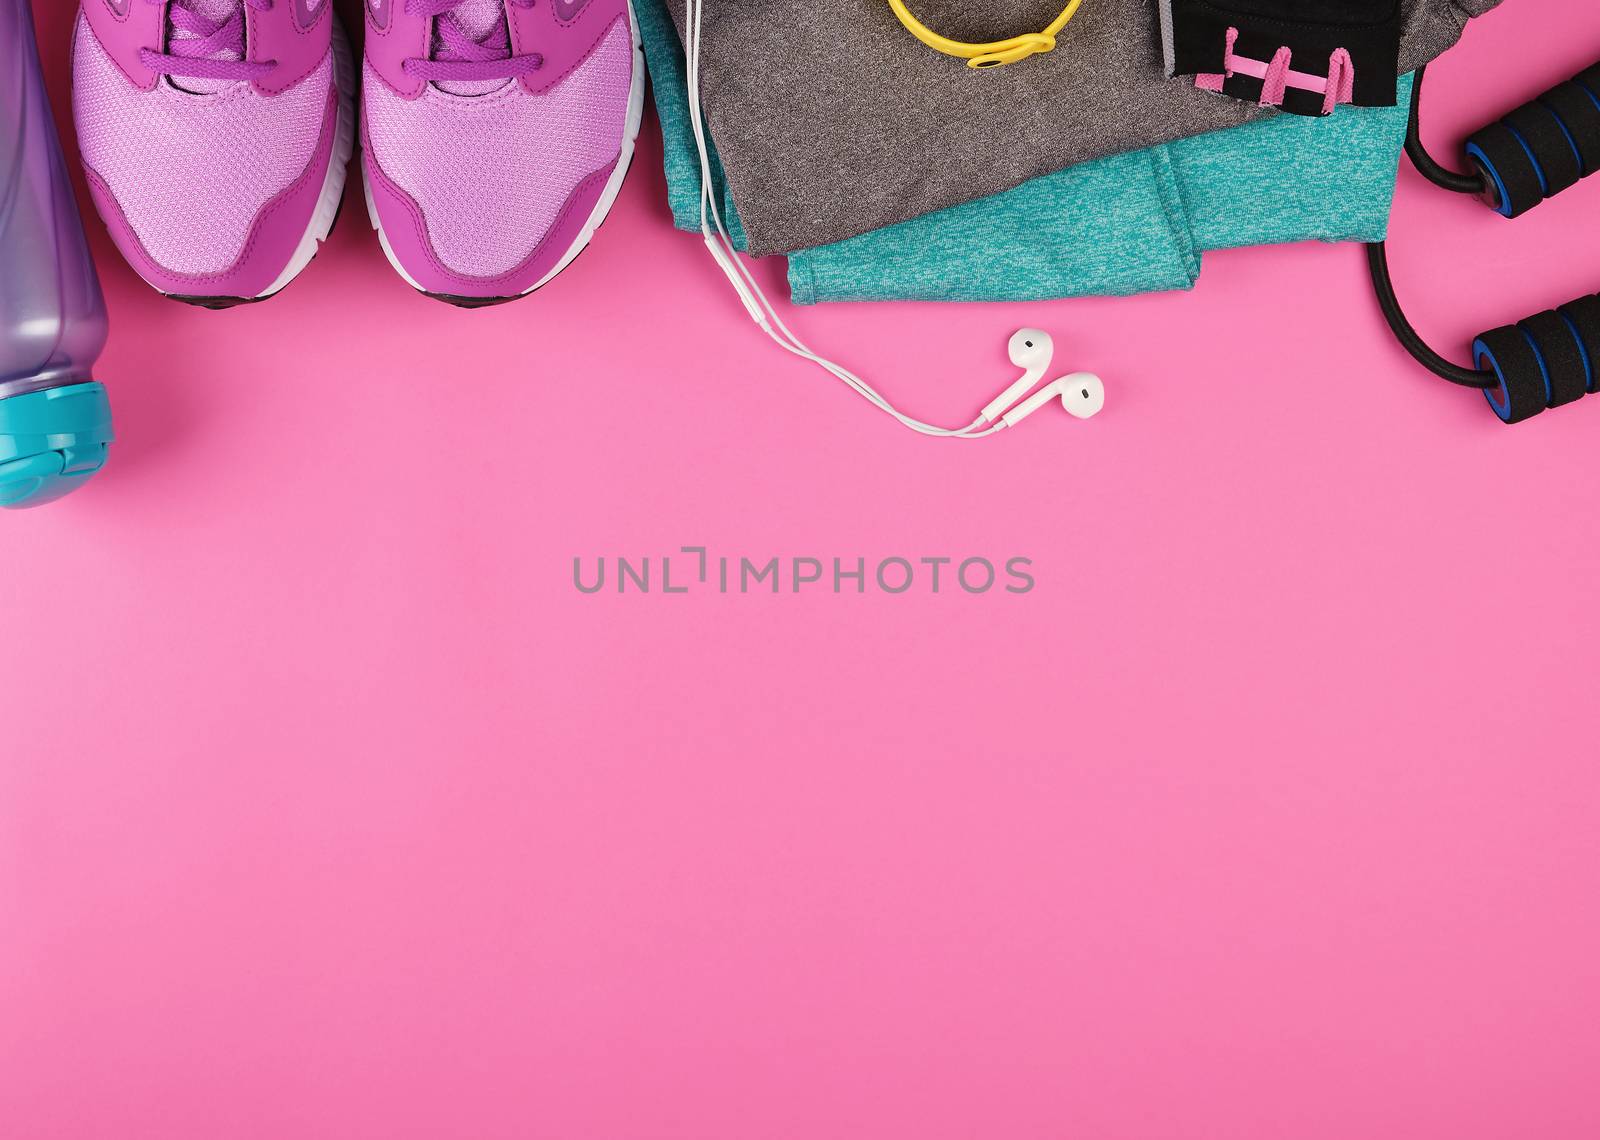 pink women's sneakers, a bottle of water, gloves and a jump rope by ndanko